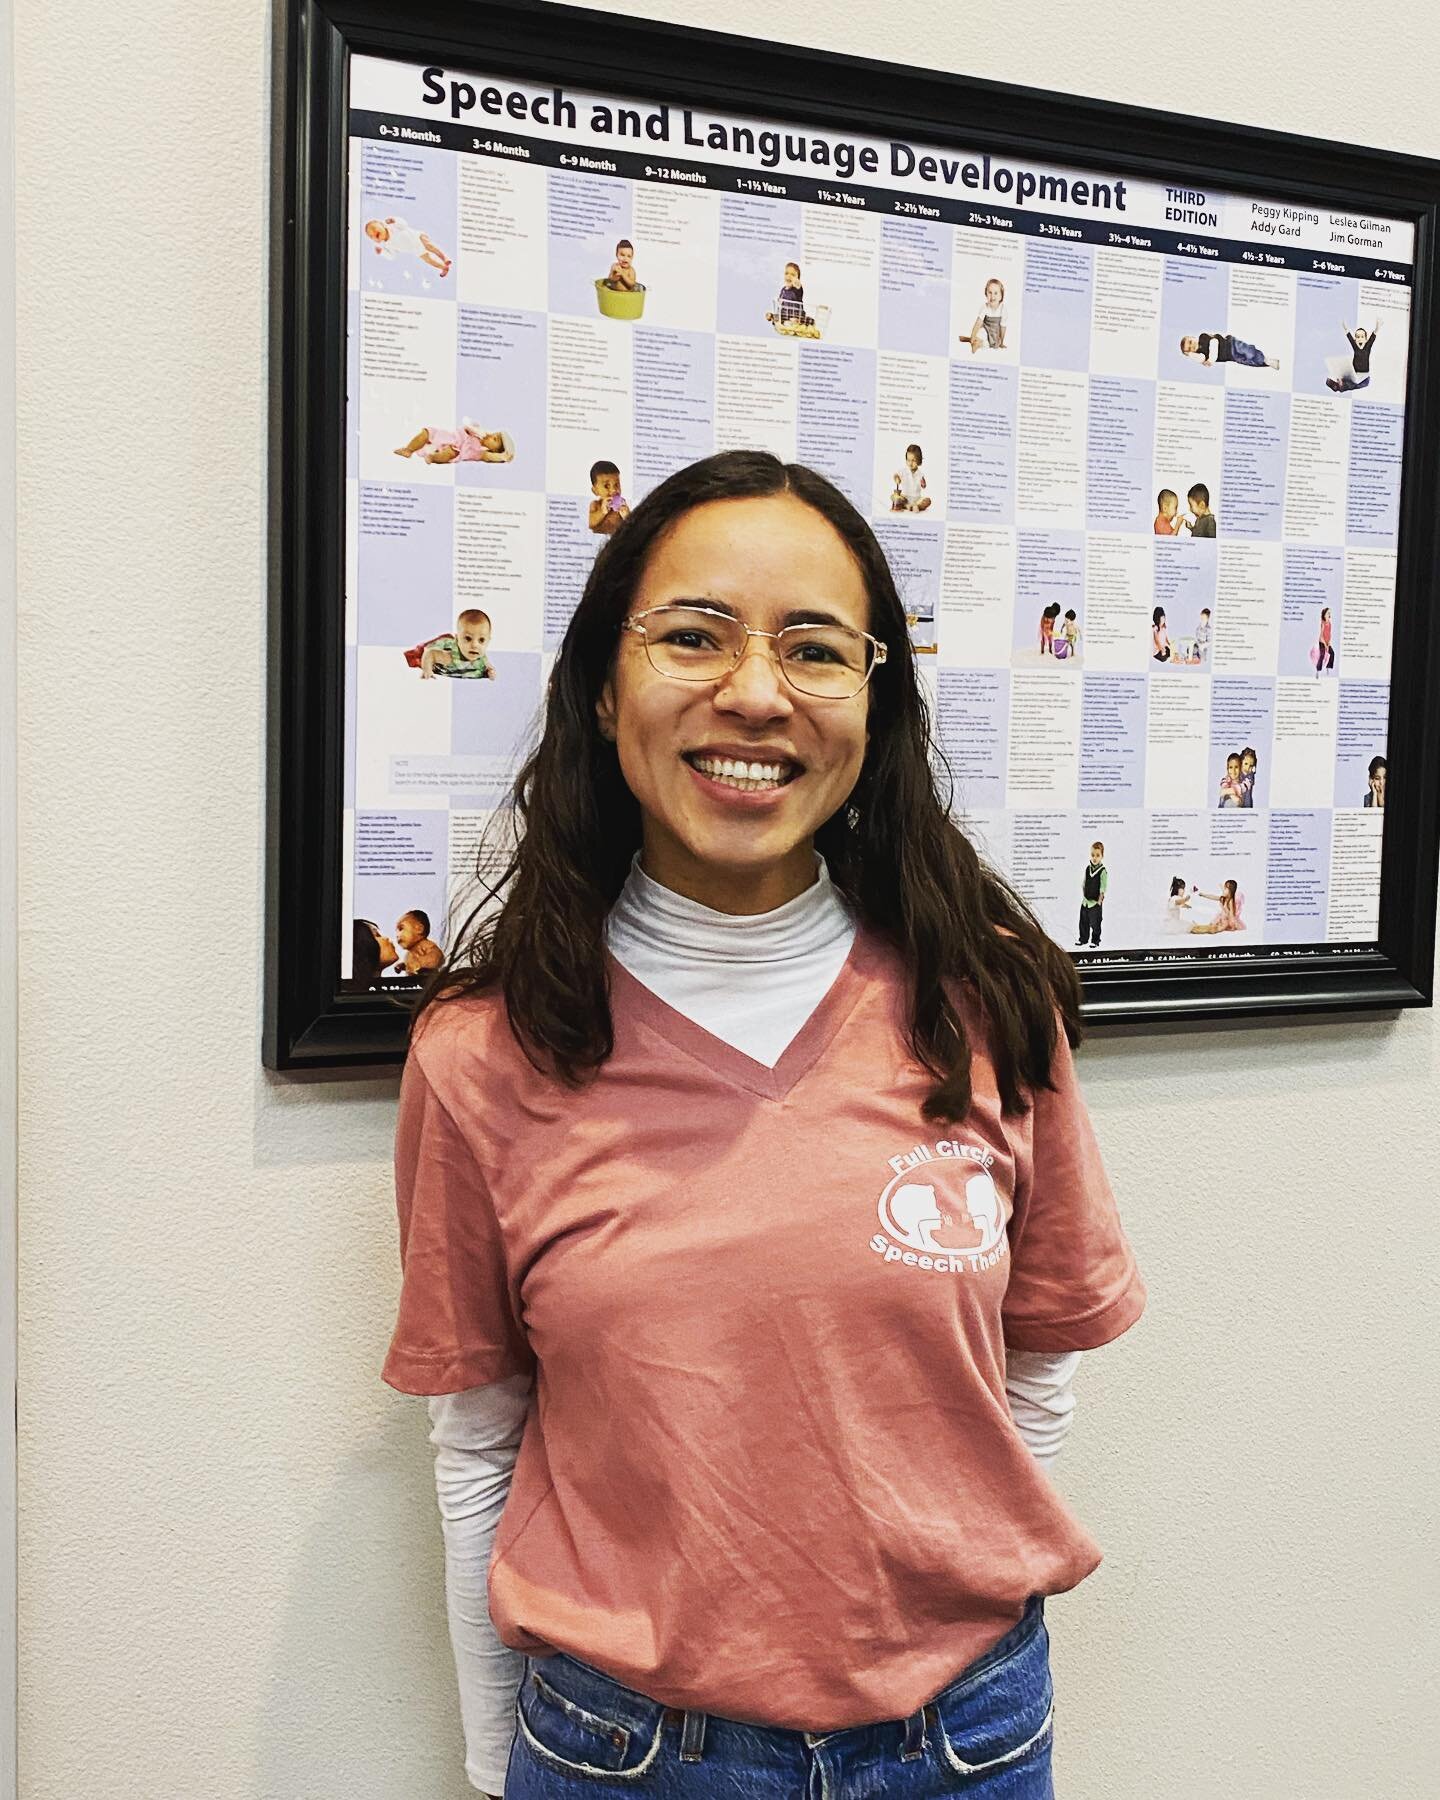 A warm @fullcirclest welcome to our new CF- SLP Talia! 🎉We are so excited to have a new addition to the best intervention team in the north state! Give her some ❤️ and show your Full Circle support!🤩
#fullcirclest
#soeechandlanguagetherapy 
#earlyi